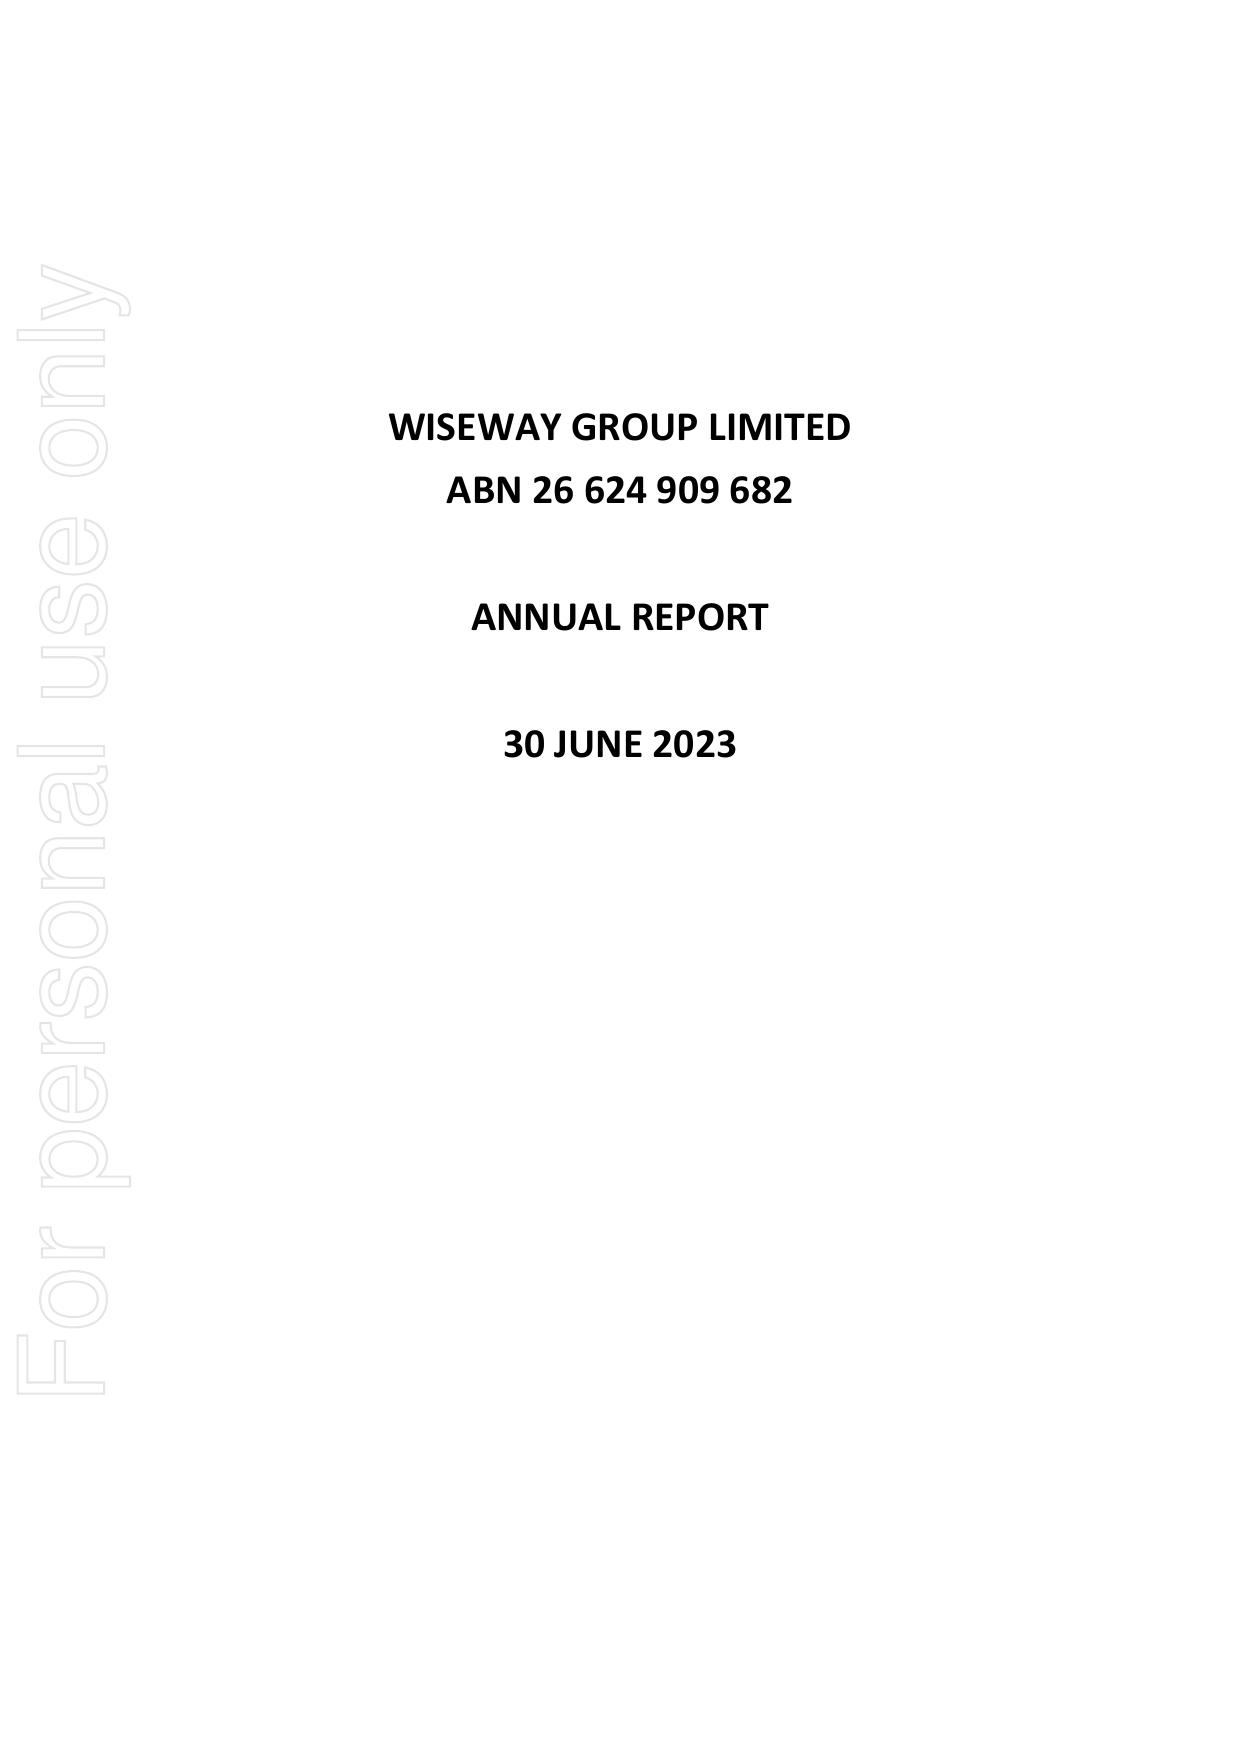 AIRCHARTERSERVICE 2023 Annual Report